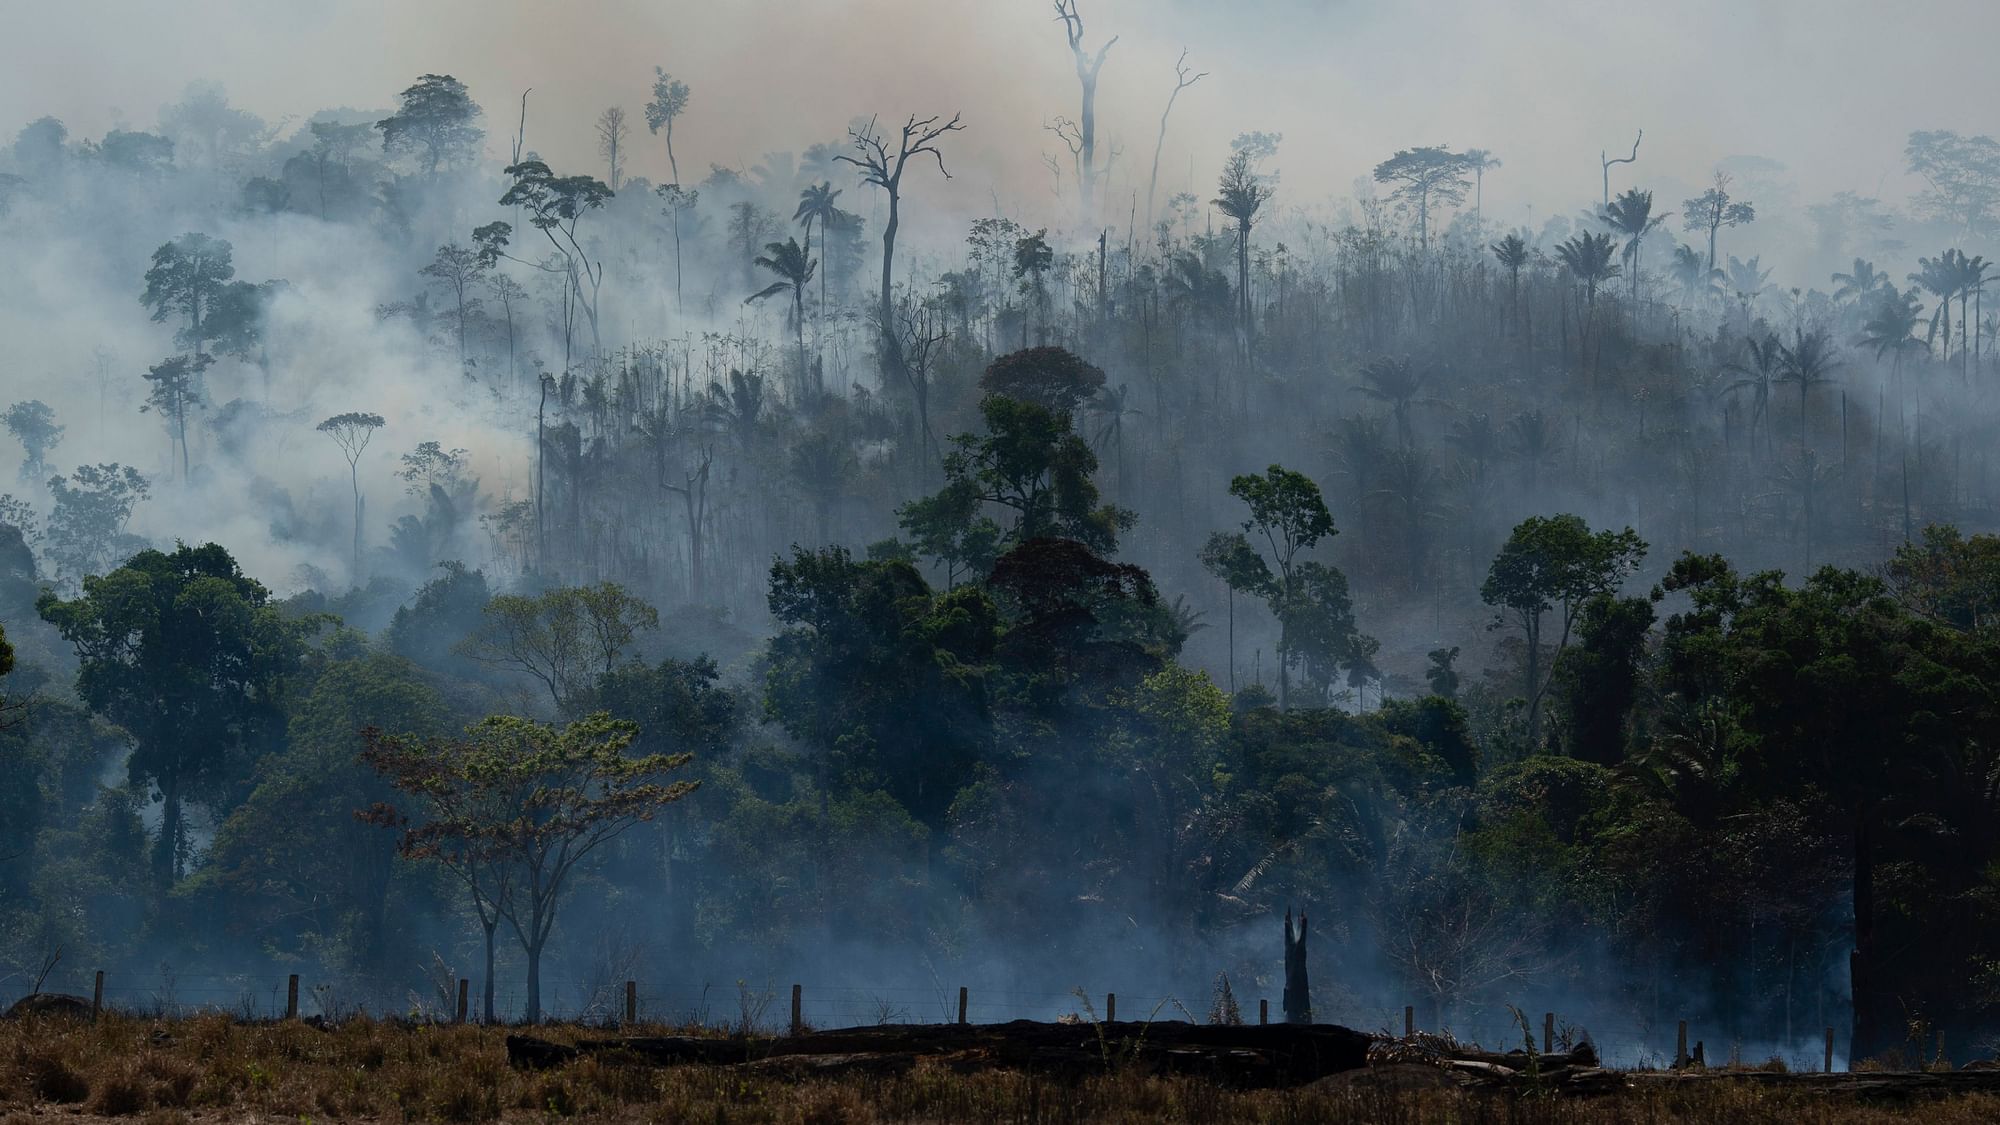 The Amazon forest scorched by fires, in a photograph from 27 August 2019.